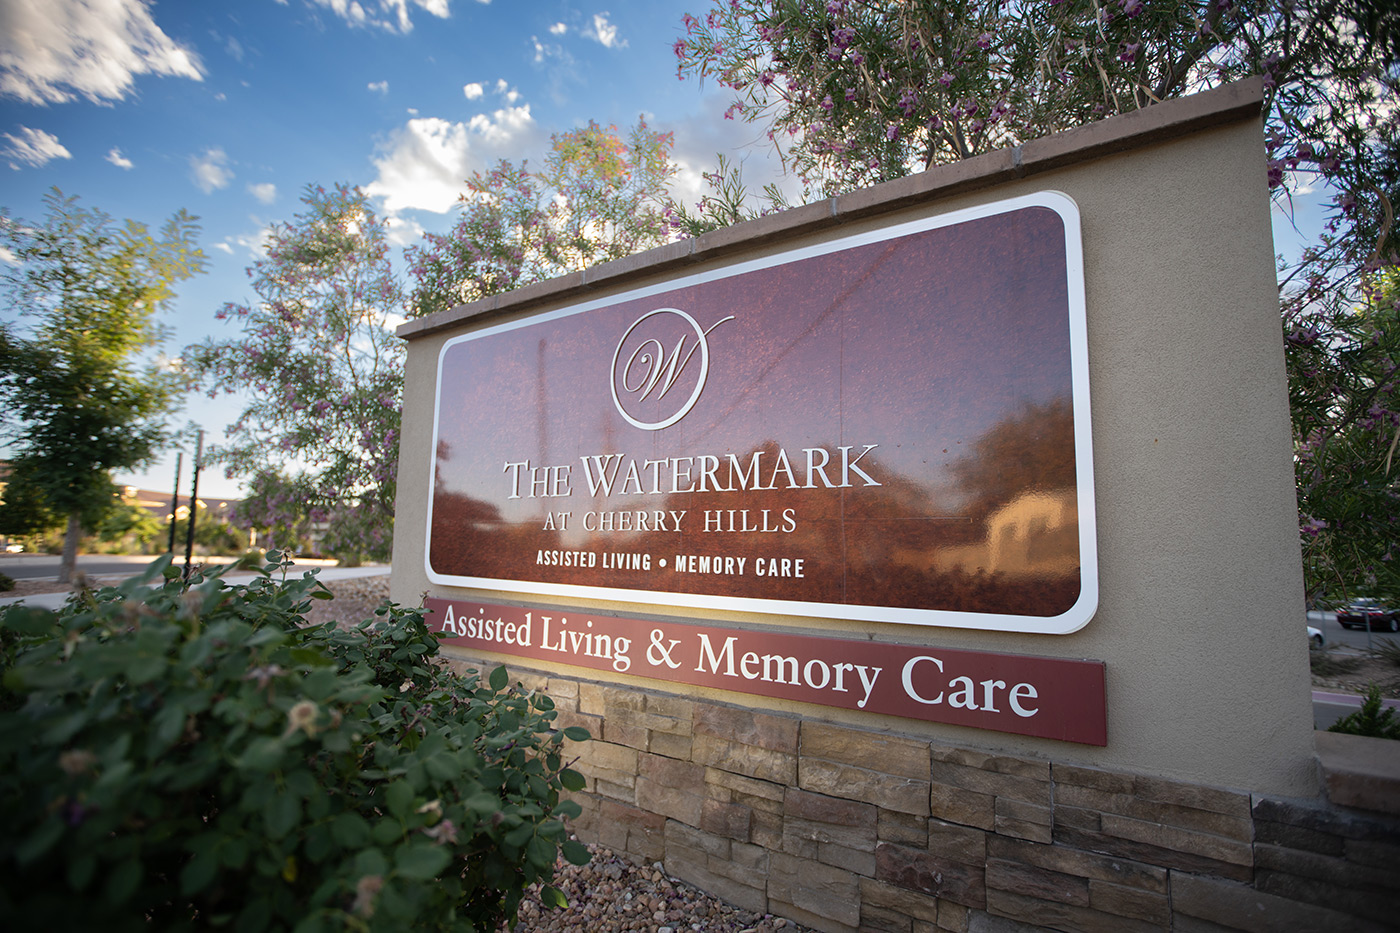 The Watermark at Cherry Hills exterior signage.